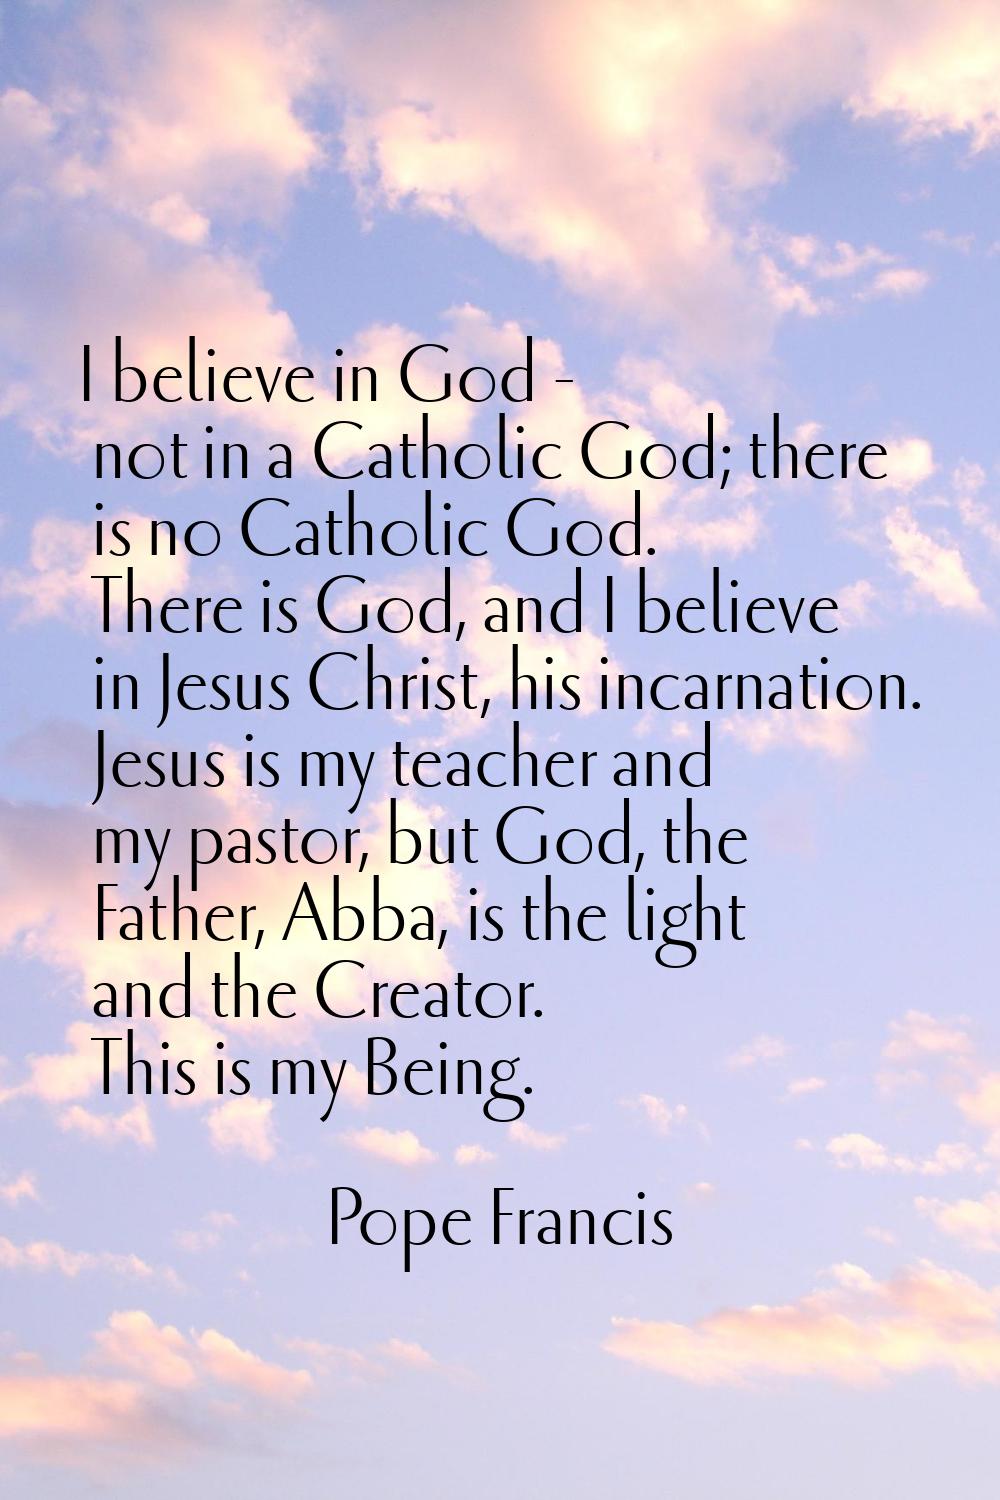 I believe in God - not in a Catholic God; there is no Catholic God. There is God, and I believe in 